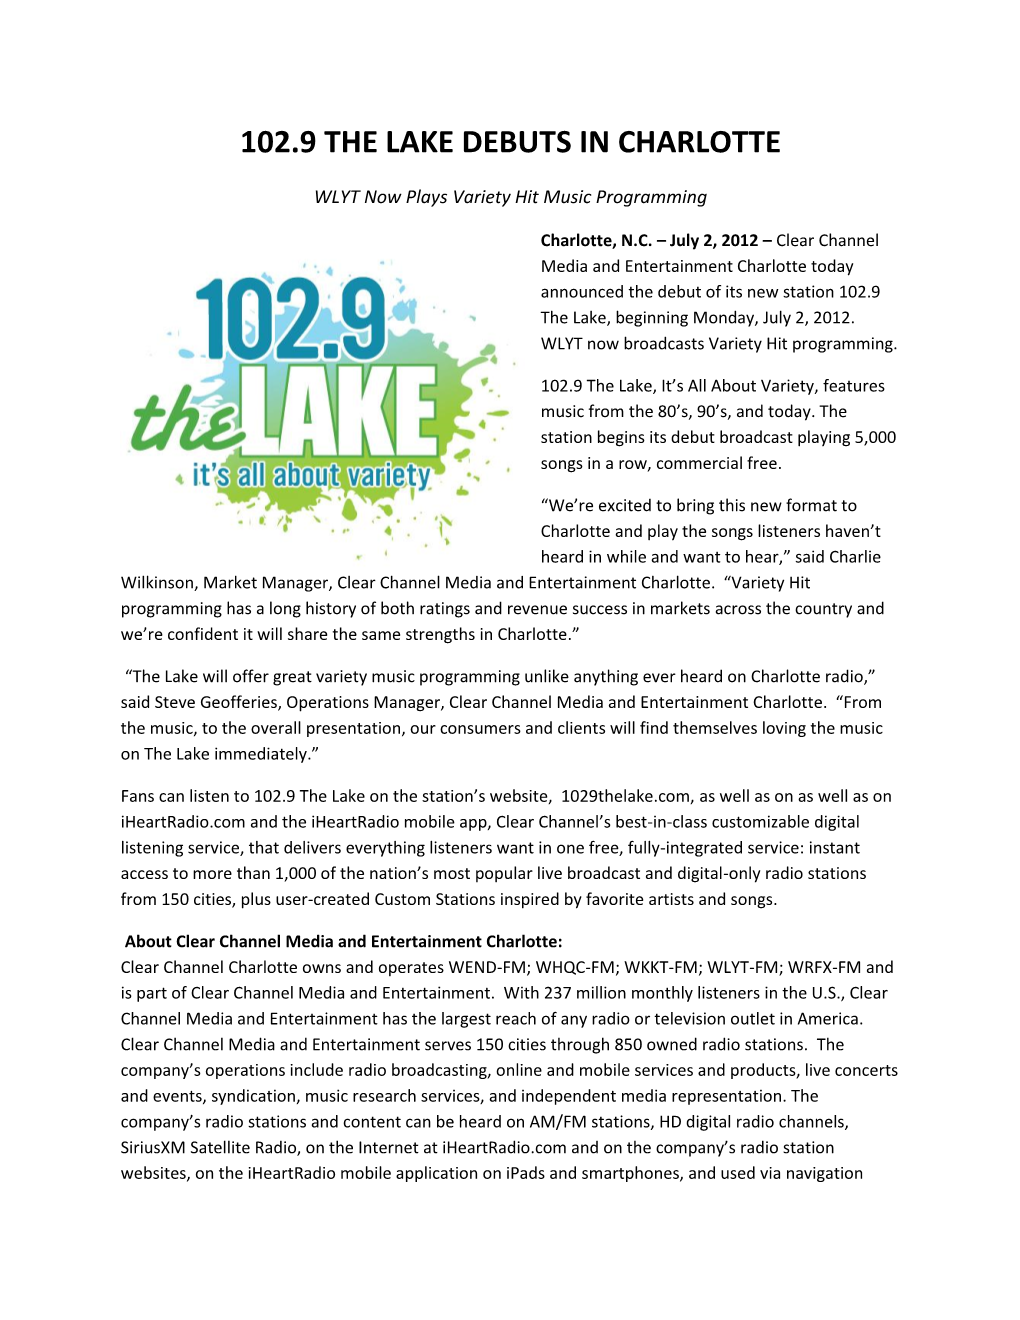 102.9 the Lake Debuts in Charlotte